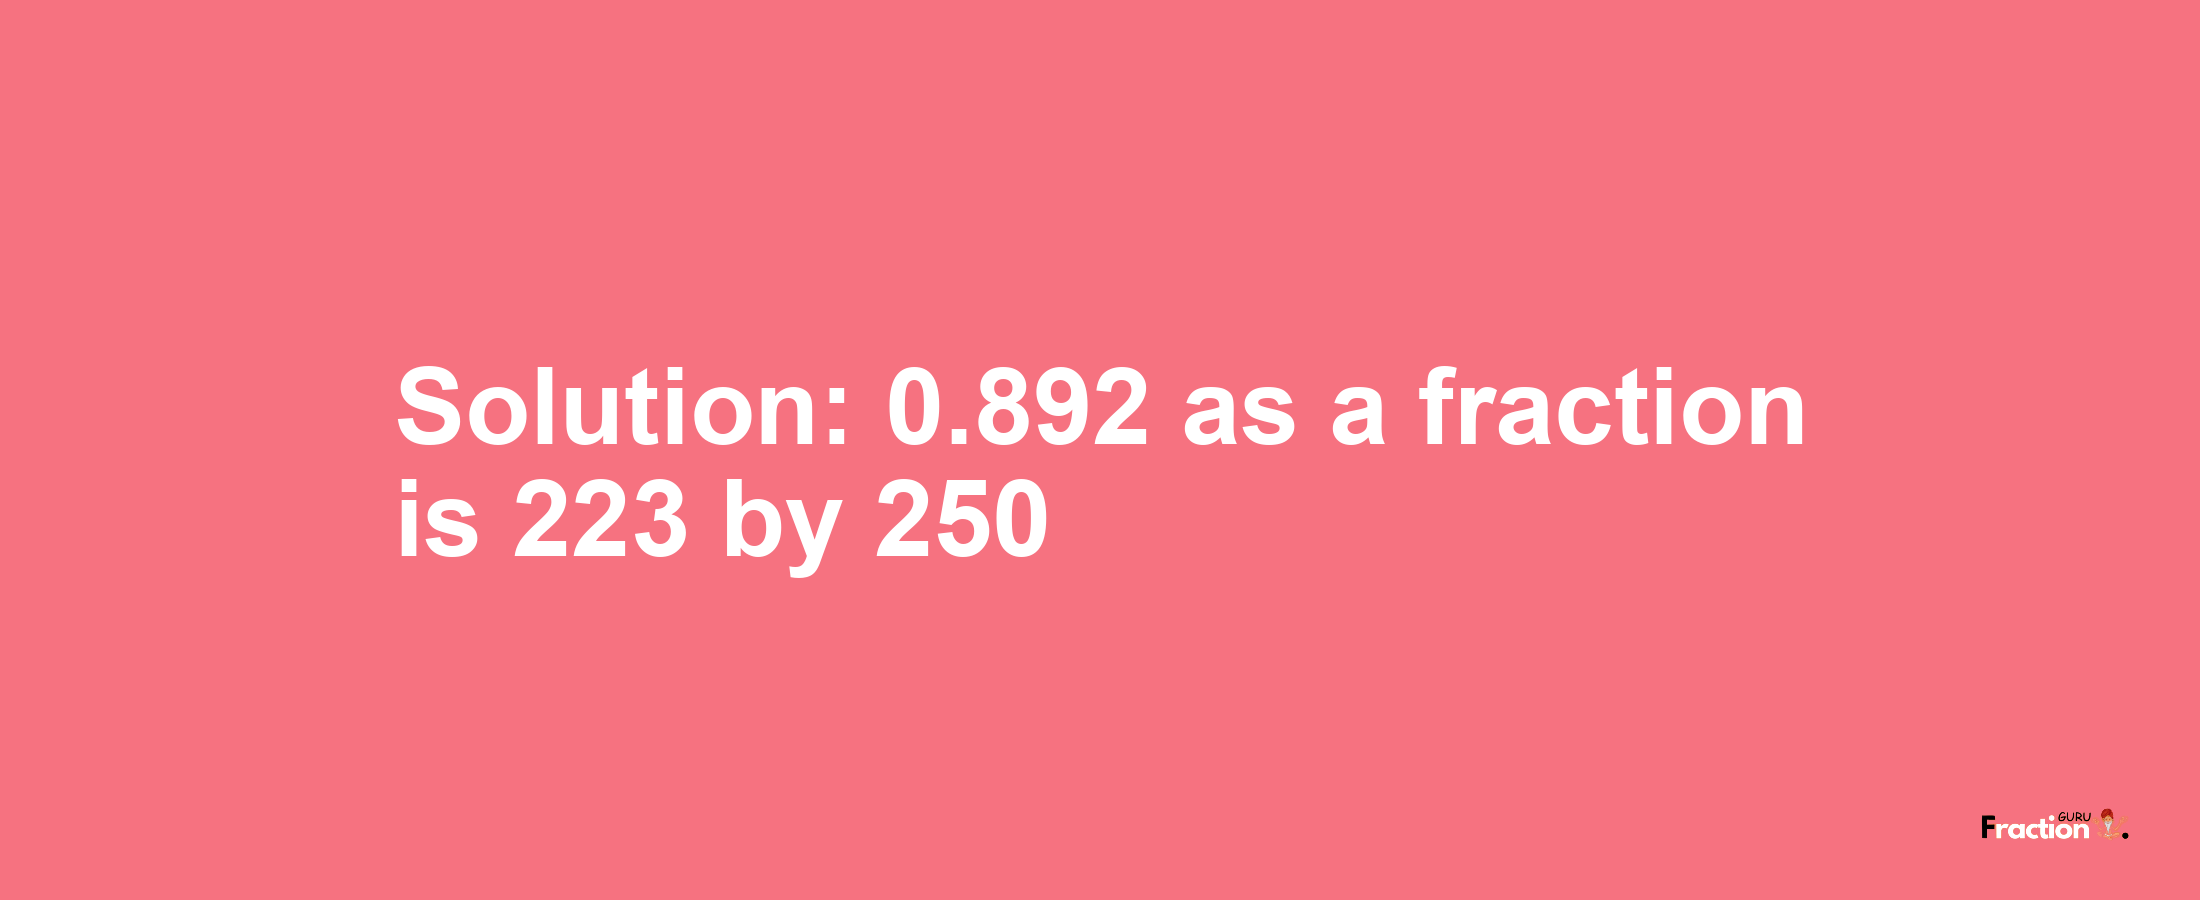 Solution:0.892 as a fraction is 223/250